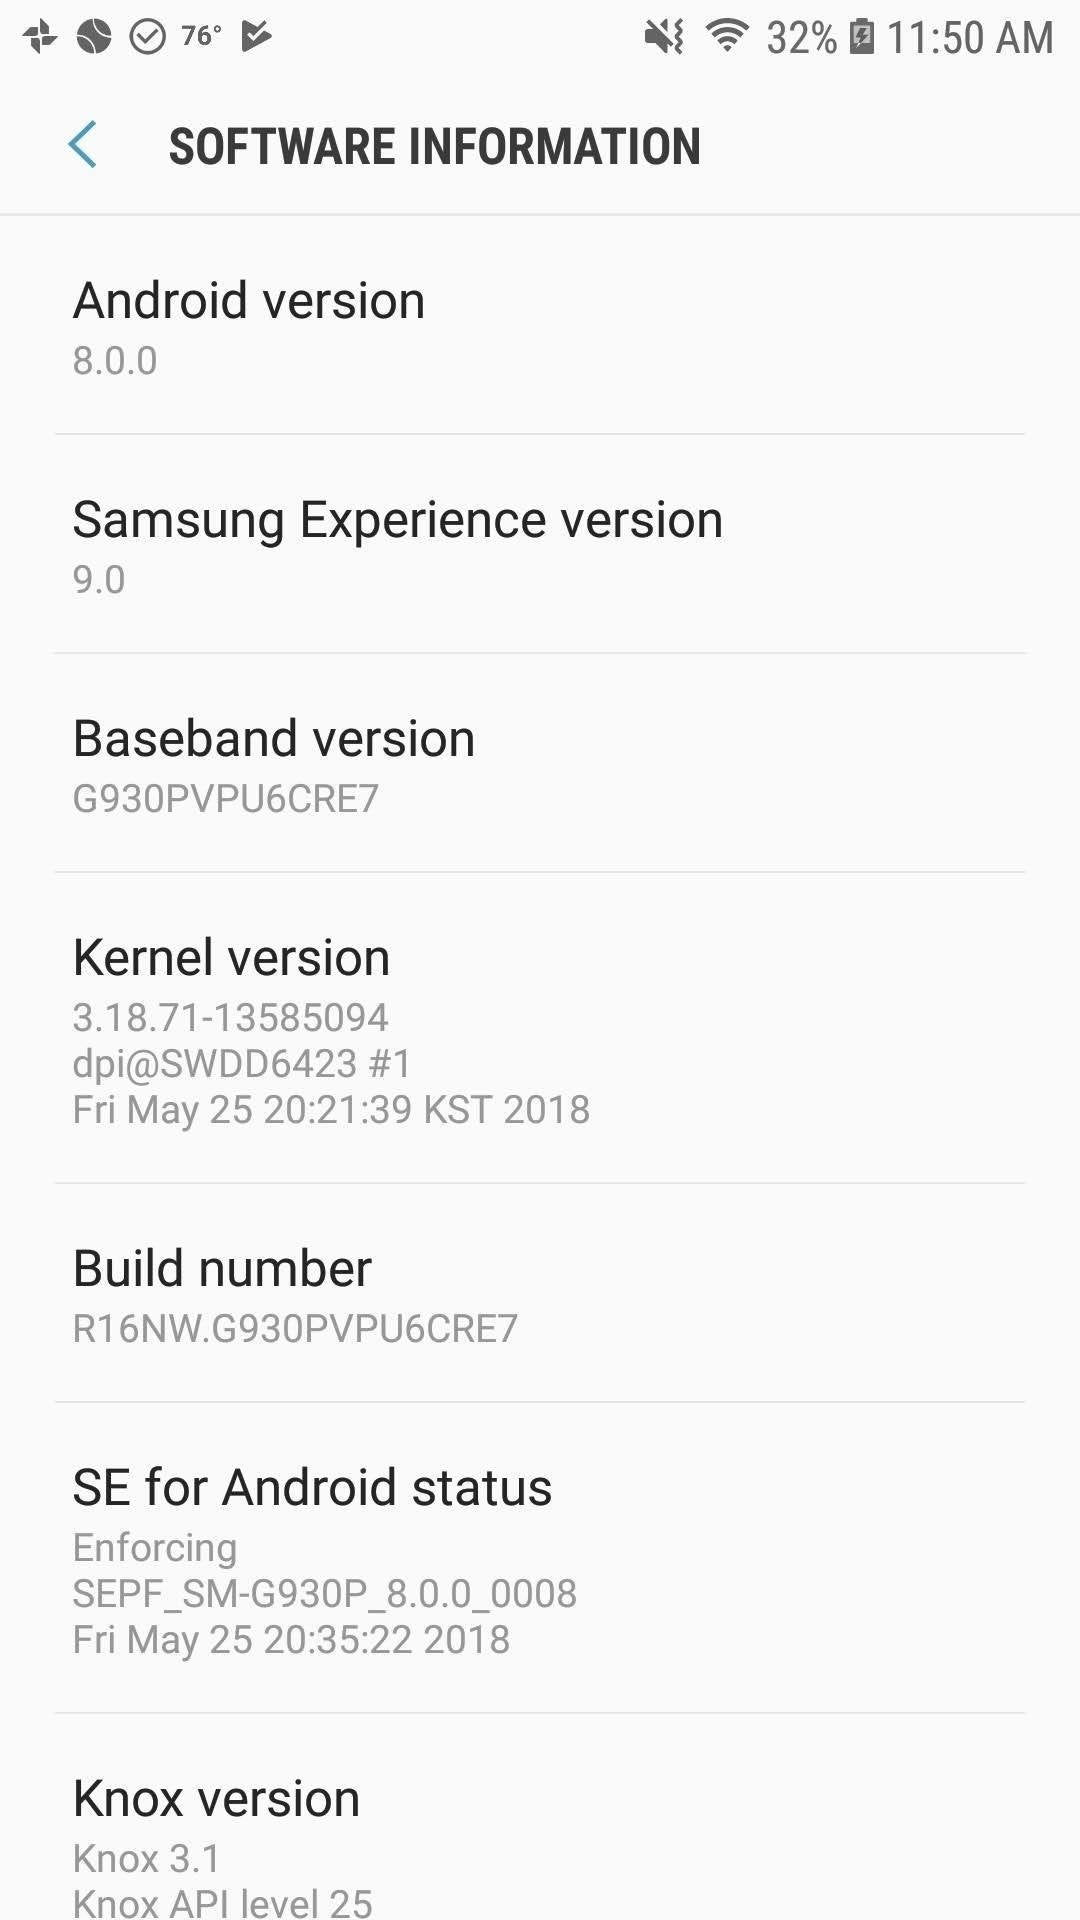 Sprint rolling out Android 8.0 Oreo for Samsung Galaxy S7 and S7 edge